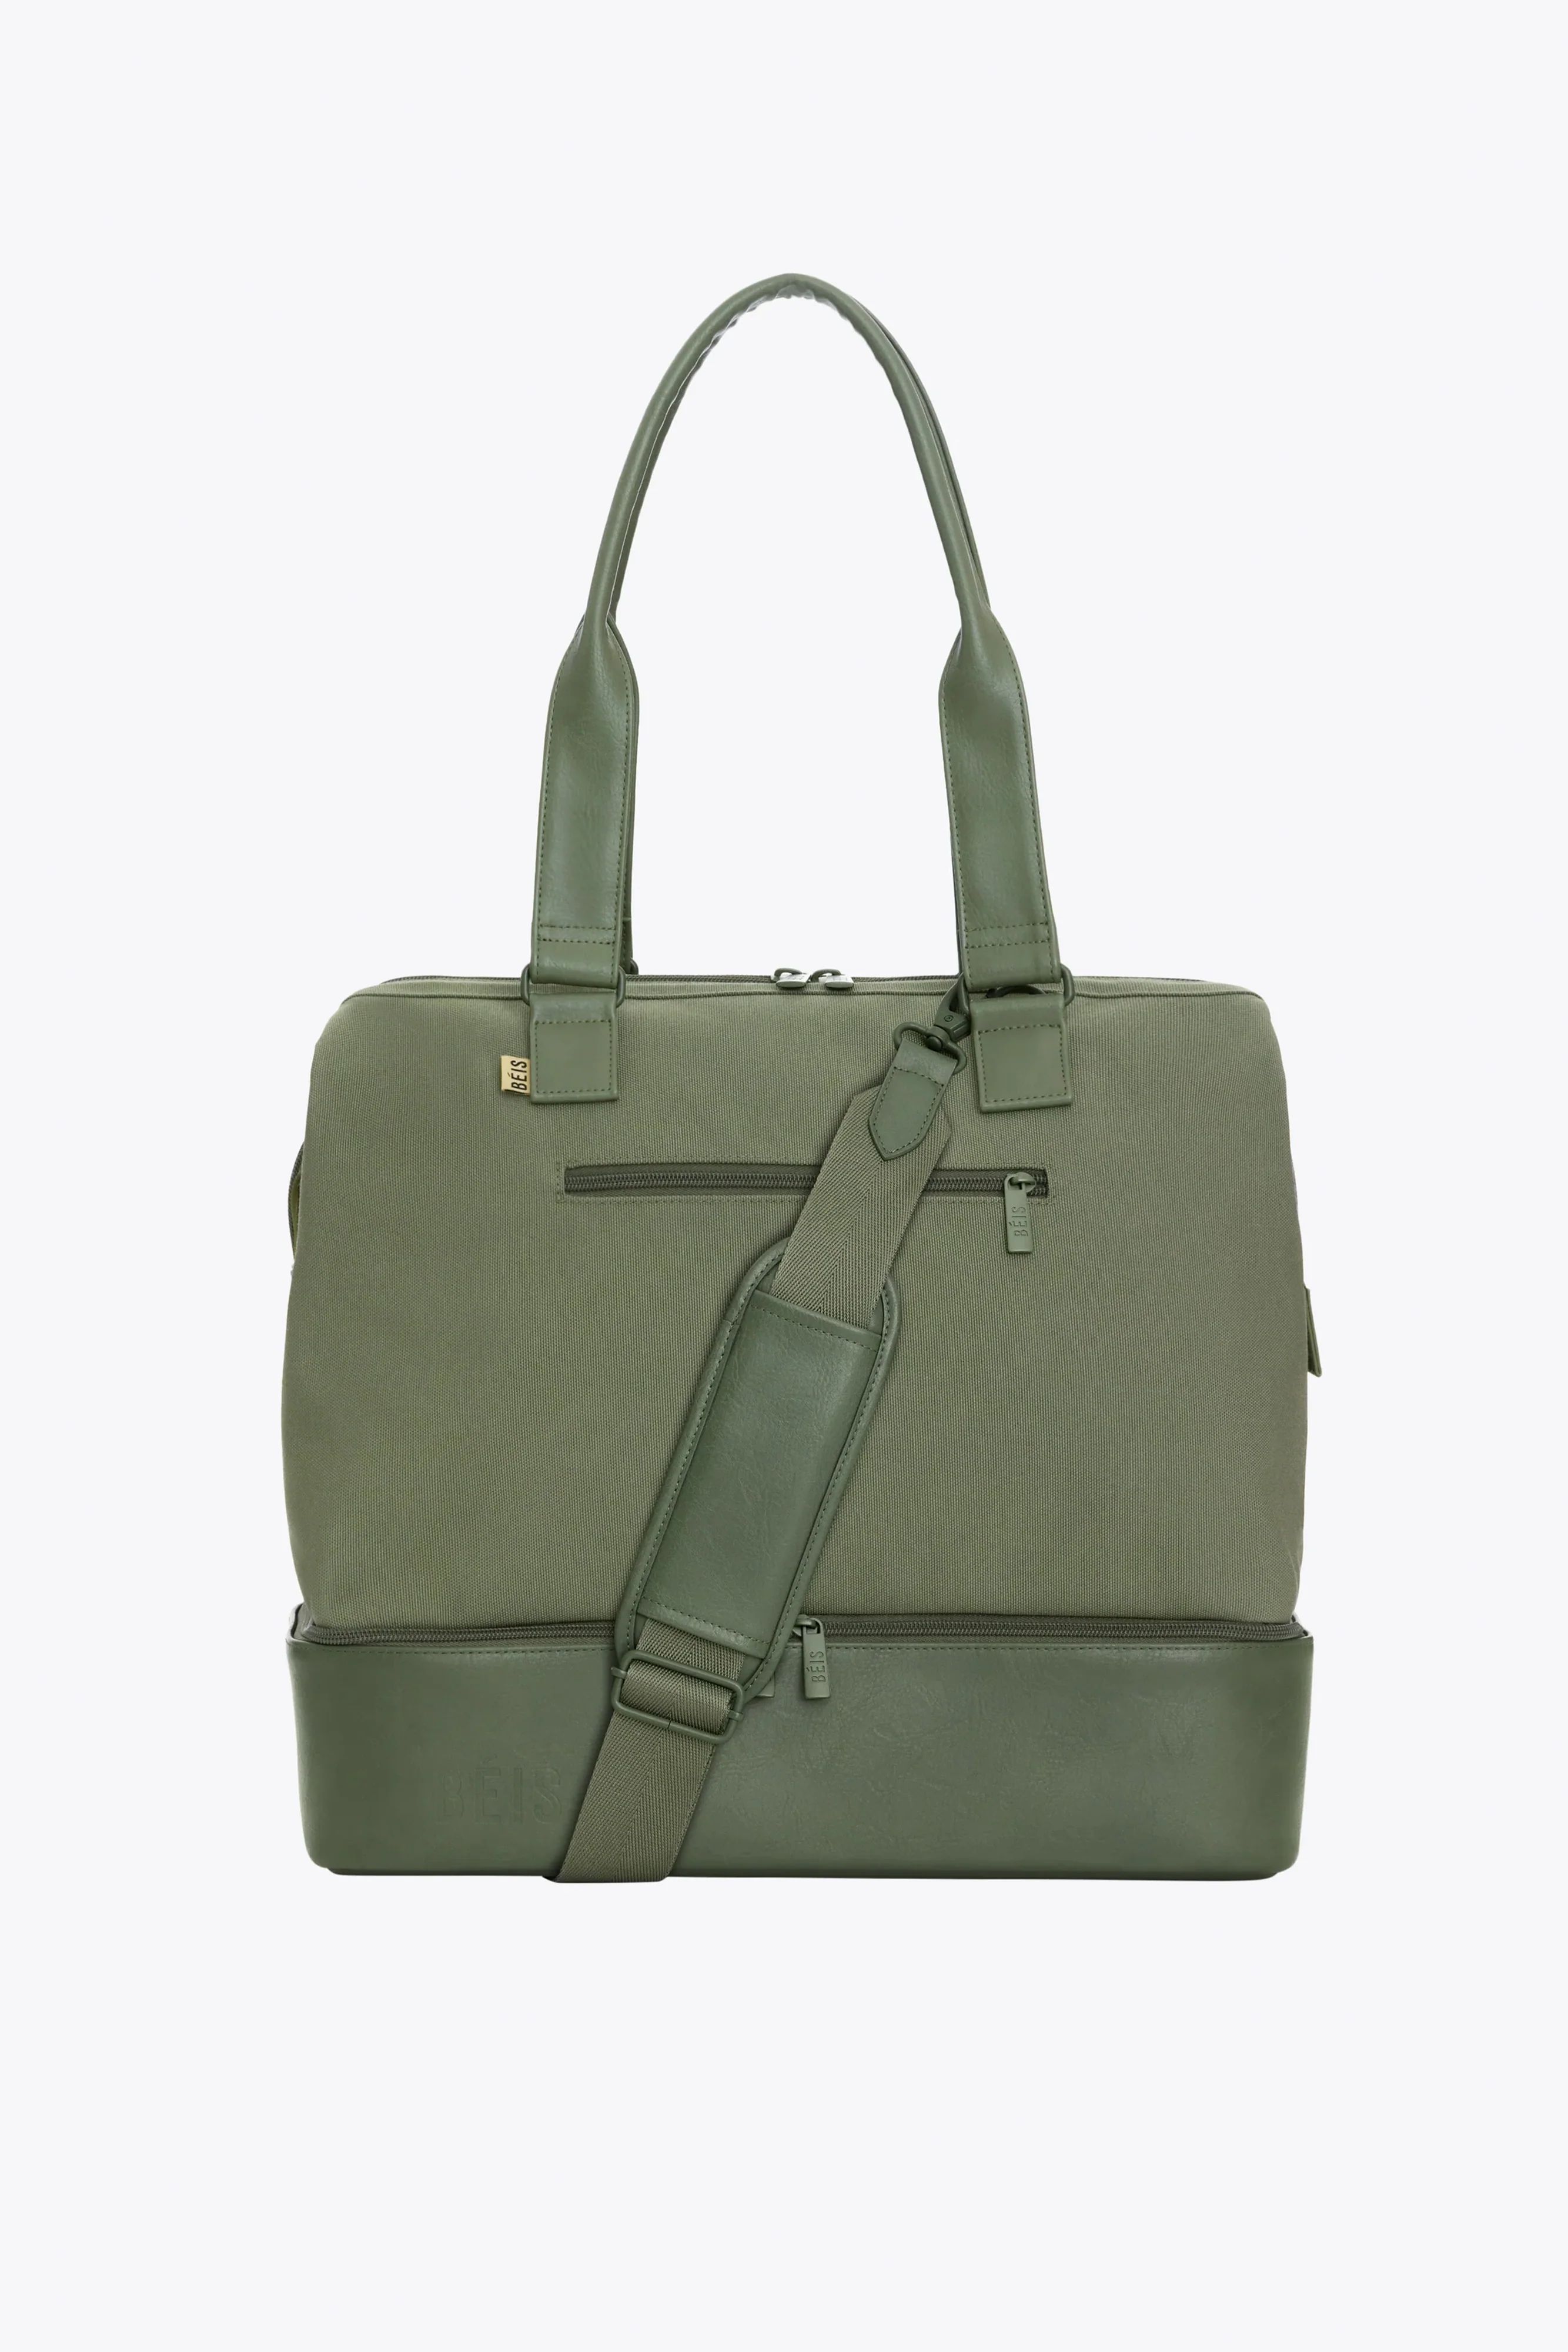 BÉIS 'The Mini Weekender' in Olive - Small Olive Green Duffle & Weekend Bag | BÉIS Travel